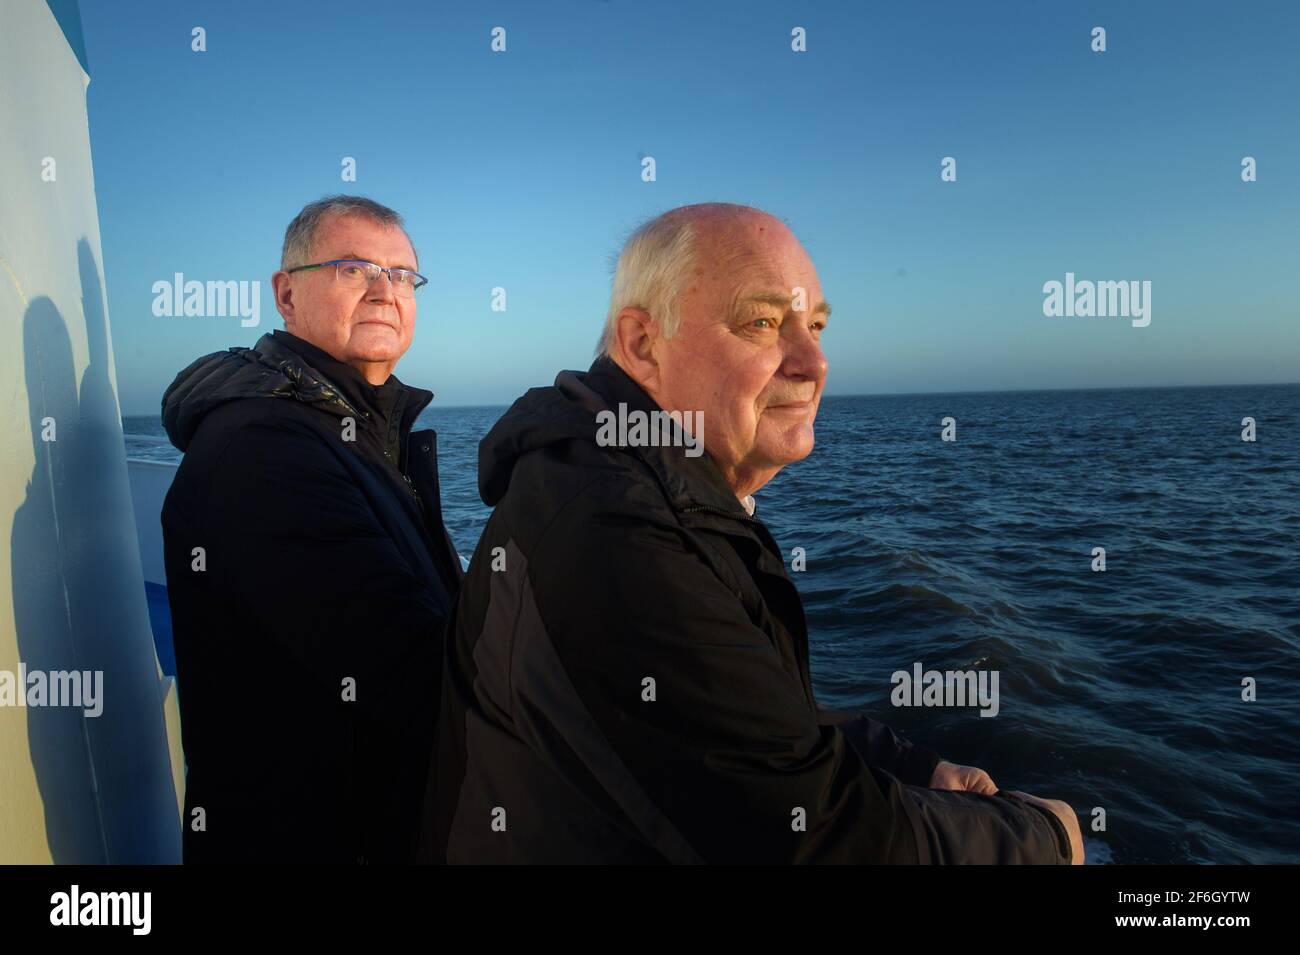 Hooge, Germany. 30th Mar, 2021. Urs Philipzig (l), medical doctor from Bredstedt and new doctor of Hallig Hooge, and Gerhard Steinort (r), medical doctor in Langenhorn and former doctor of Hallig Hooge, stand at the stern of the MS Seeadler on the way to Hallig Hooge during sunrise. (to dpa 'Hooge's Hallig doctor retires') Credit: Gregor Fischer/dpa/Alamy Live News Stock Photo